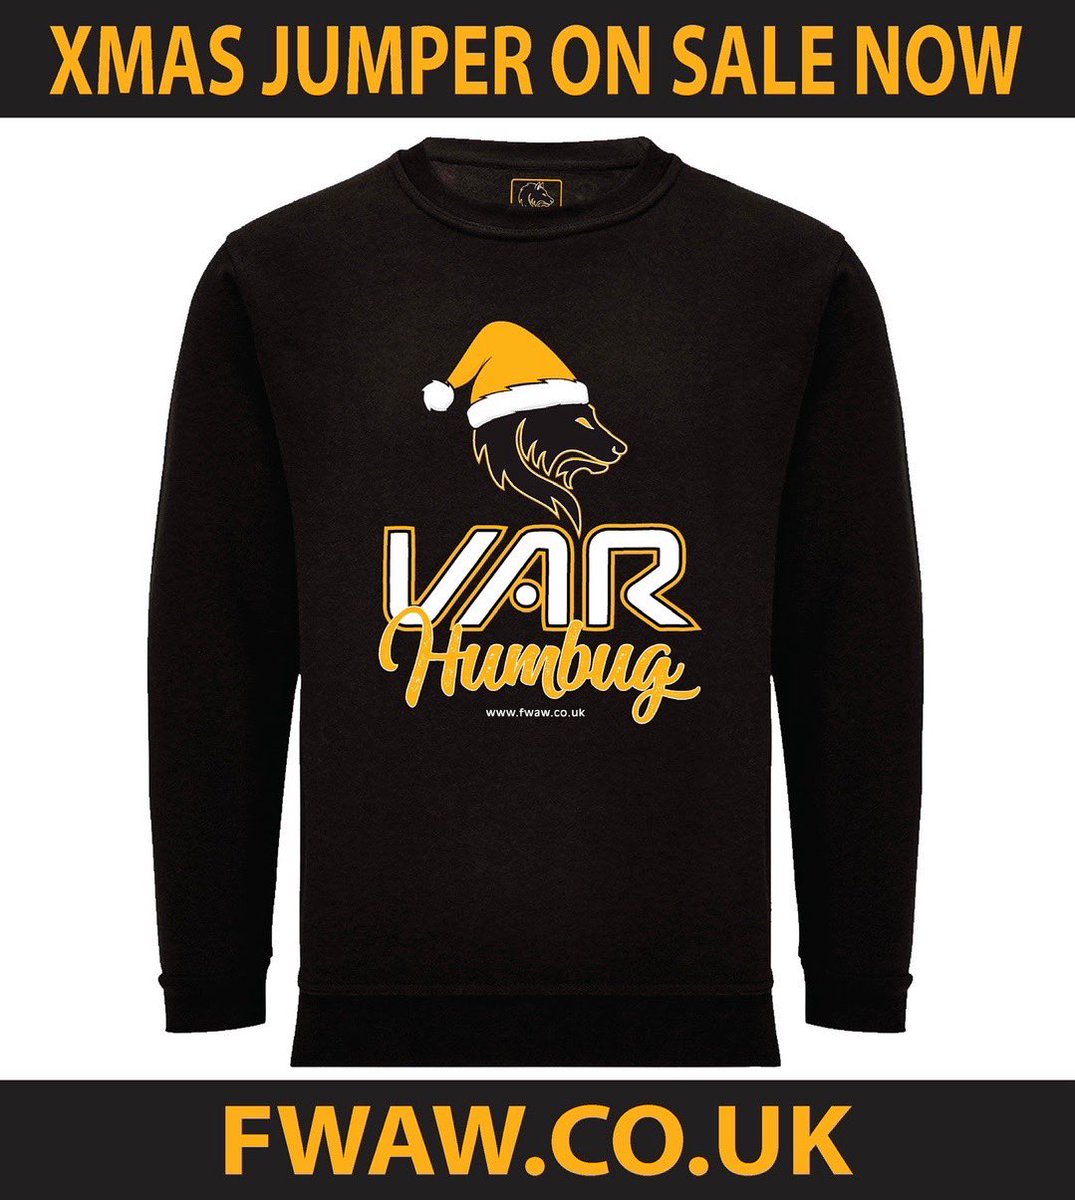 When you get your Xmas jumper off wish instead of FWAW’s quality merch 😉🤣

#wolfpack #wolves #foreverwolves #wolverhampton #wolverhamptonwanderersfc #var #wwfc #wolvesfc #wolvesofinstagram #wolves #wolverhampton #wolvesaywe